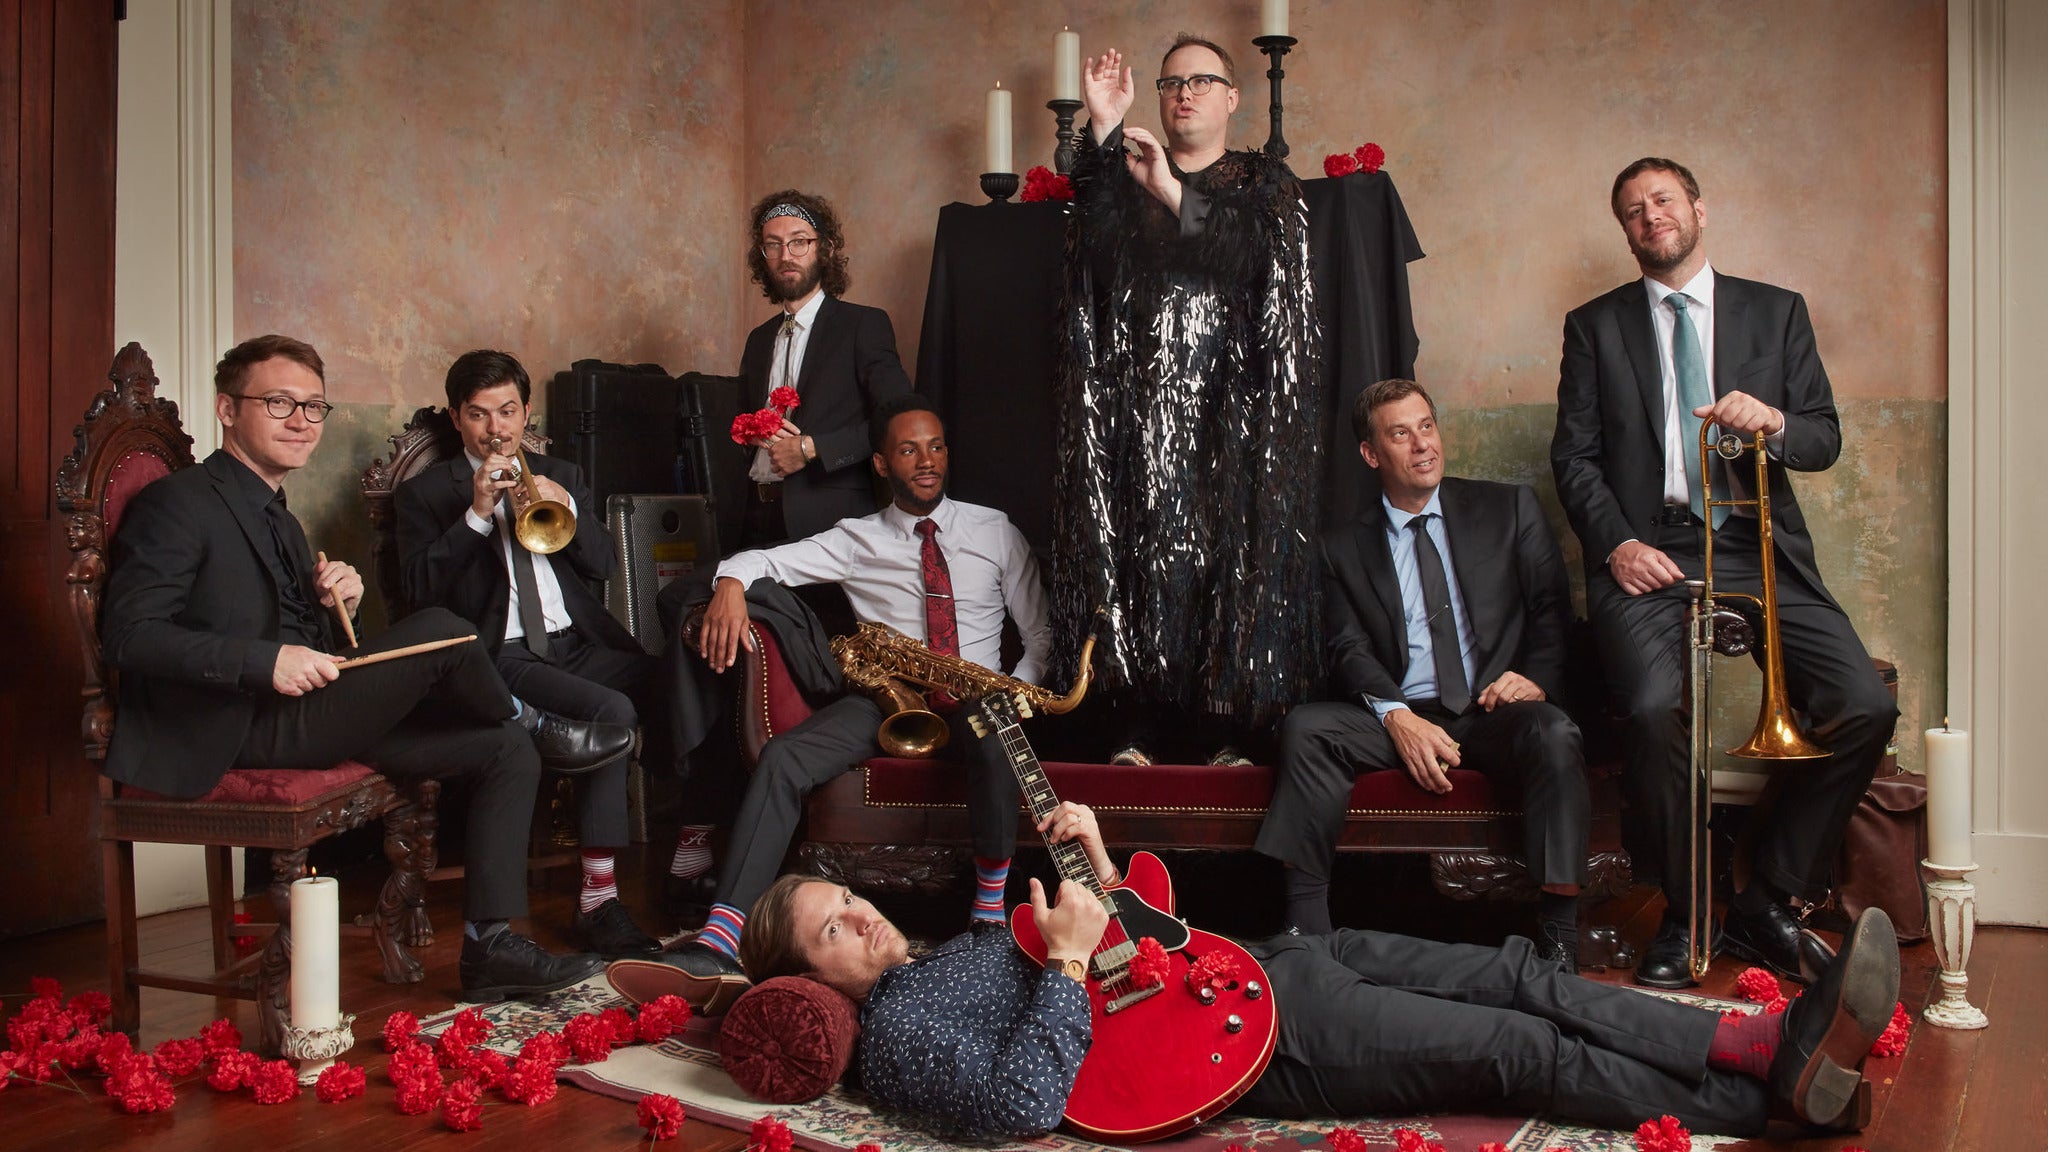 Image used with permission from Ticketmaster | St. Paul and the Broken Bones tickets